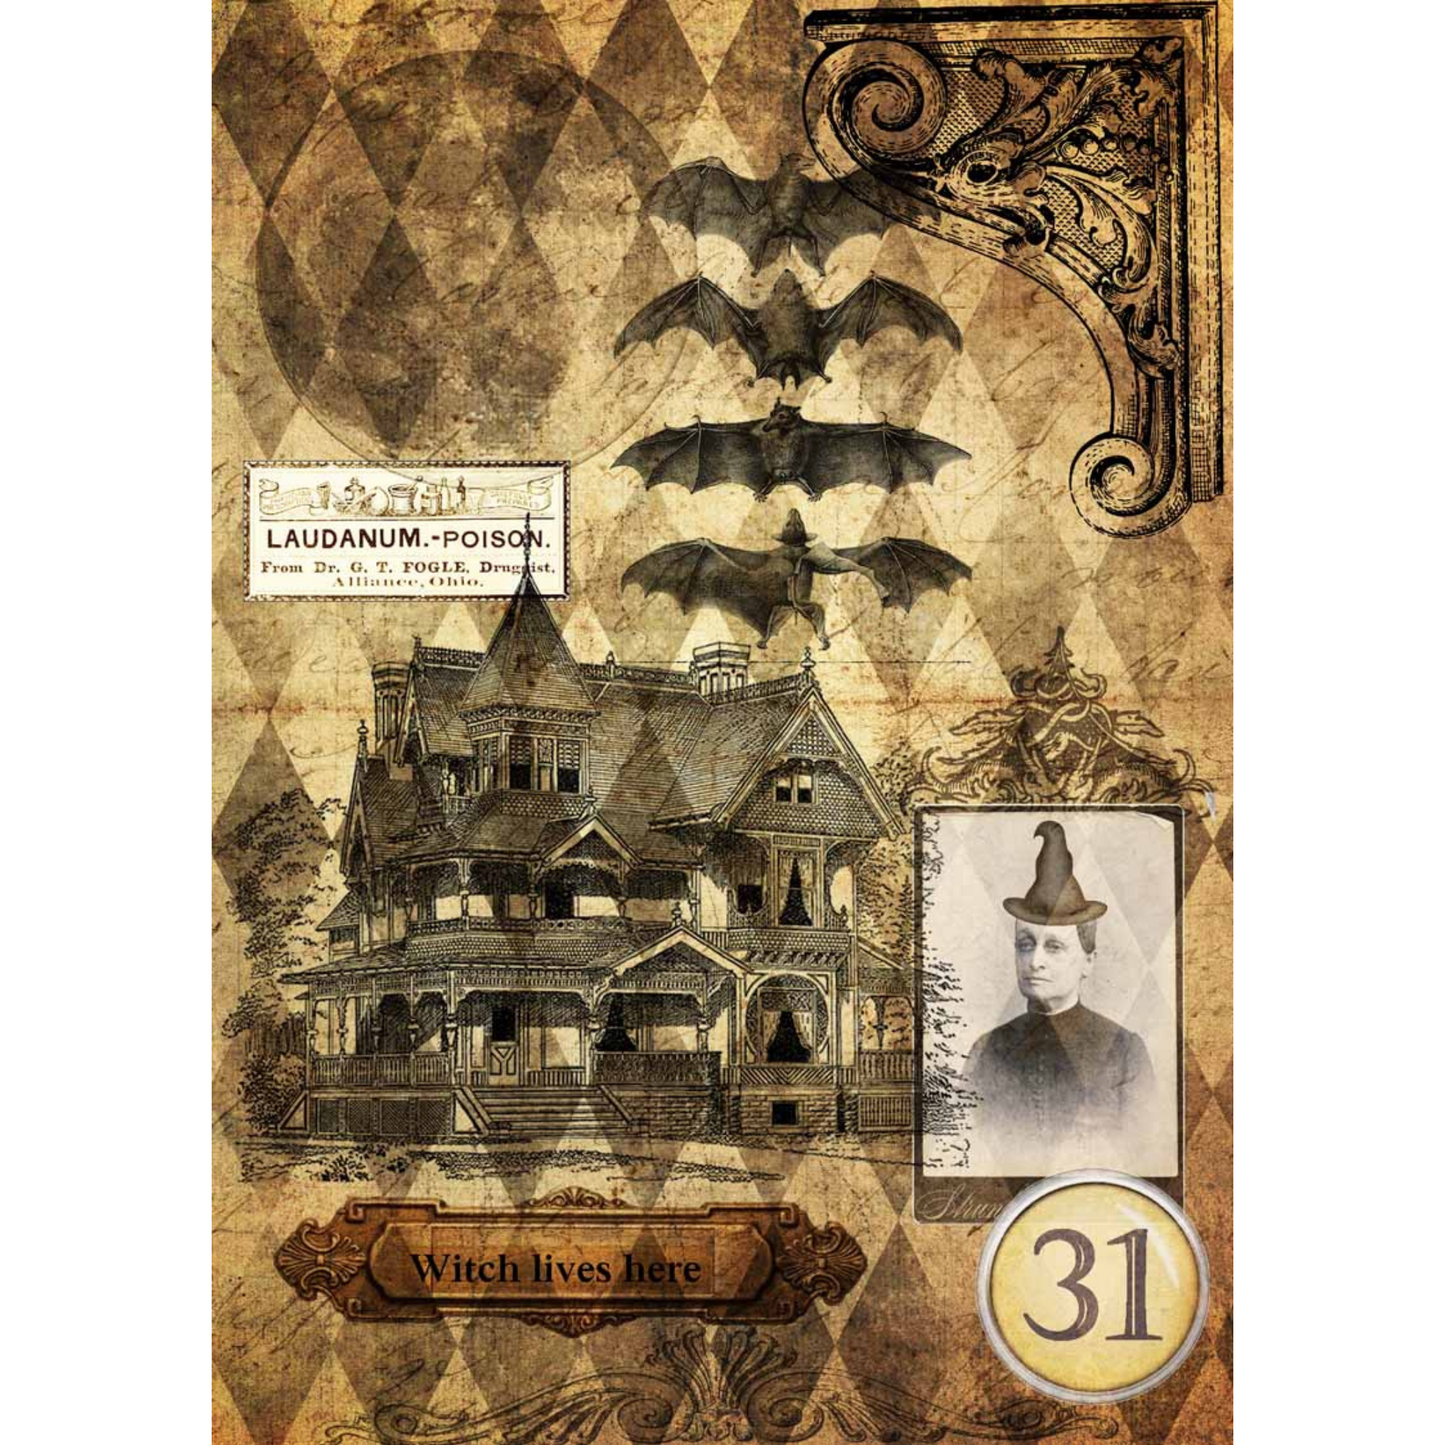 Decoupage Queen "Halloween Haunted House with Witch" Decoupage Rice Paper. Size A4-8.3" x 11.7" available at Milton's Daughter